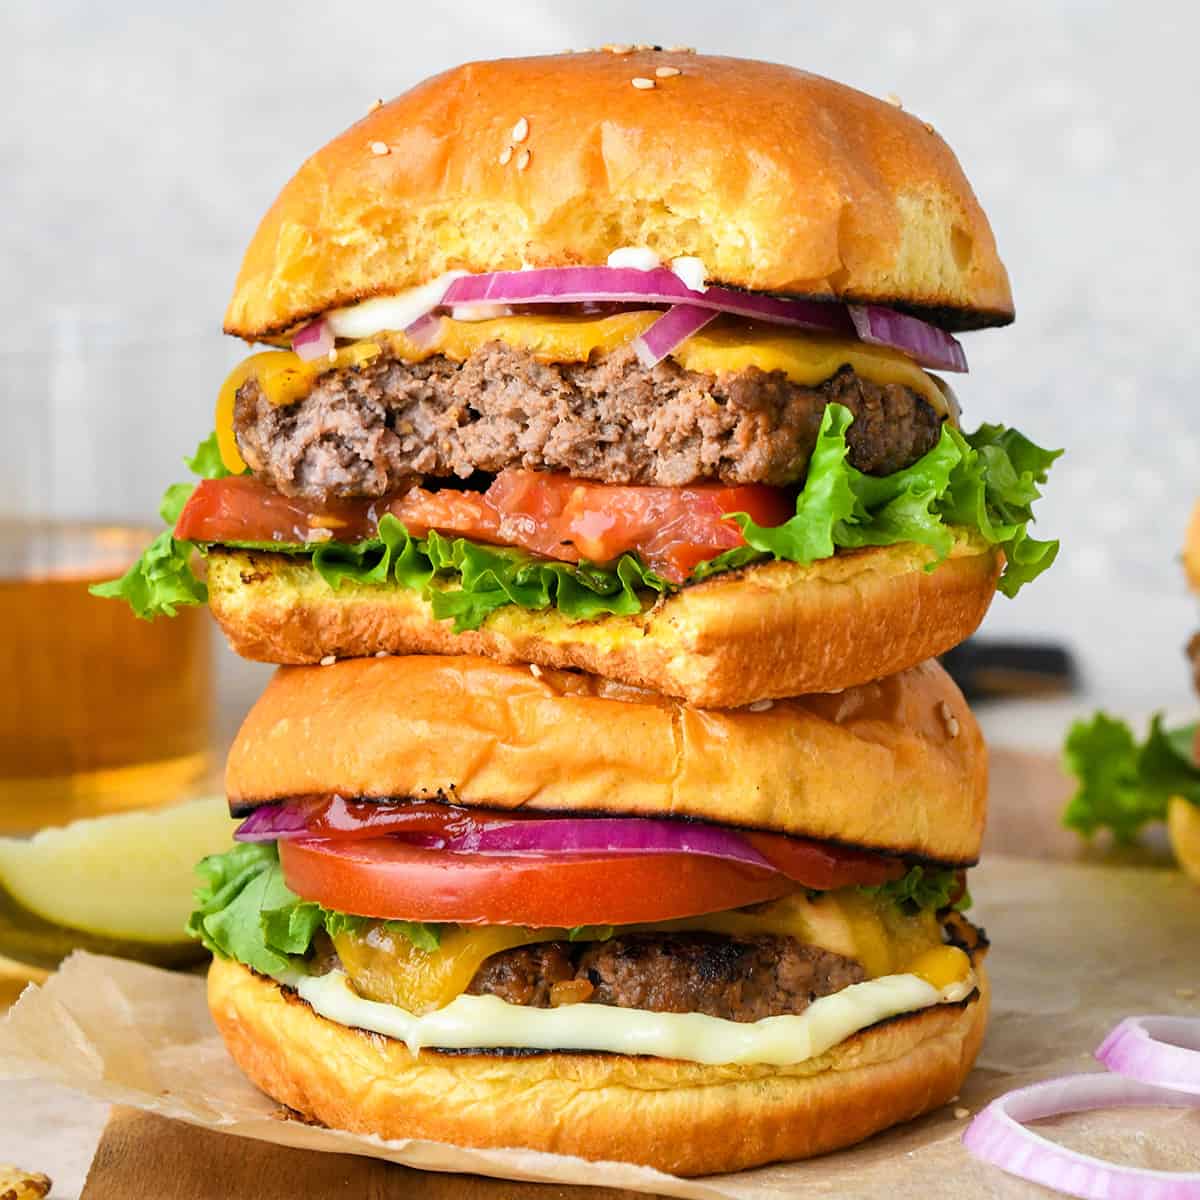 a stack of two hamburgers, the top one has a bite taken out of it